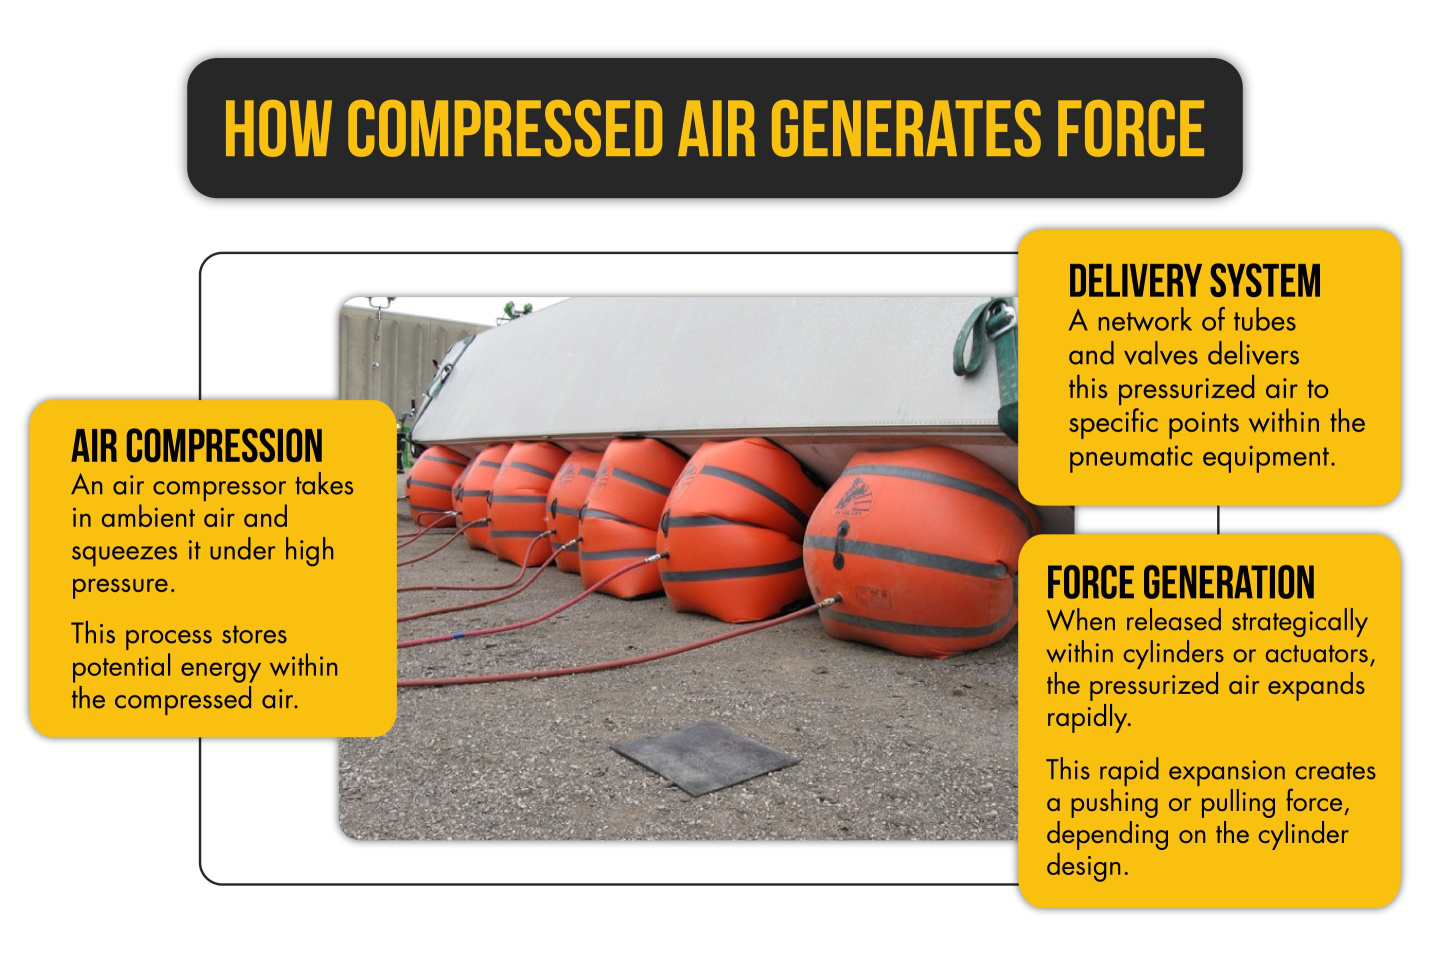 An infographic explaining how compressed air generates force